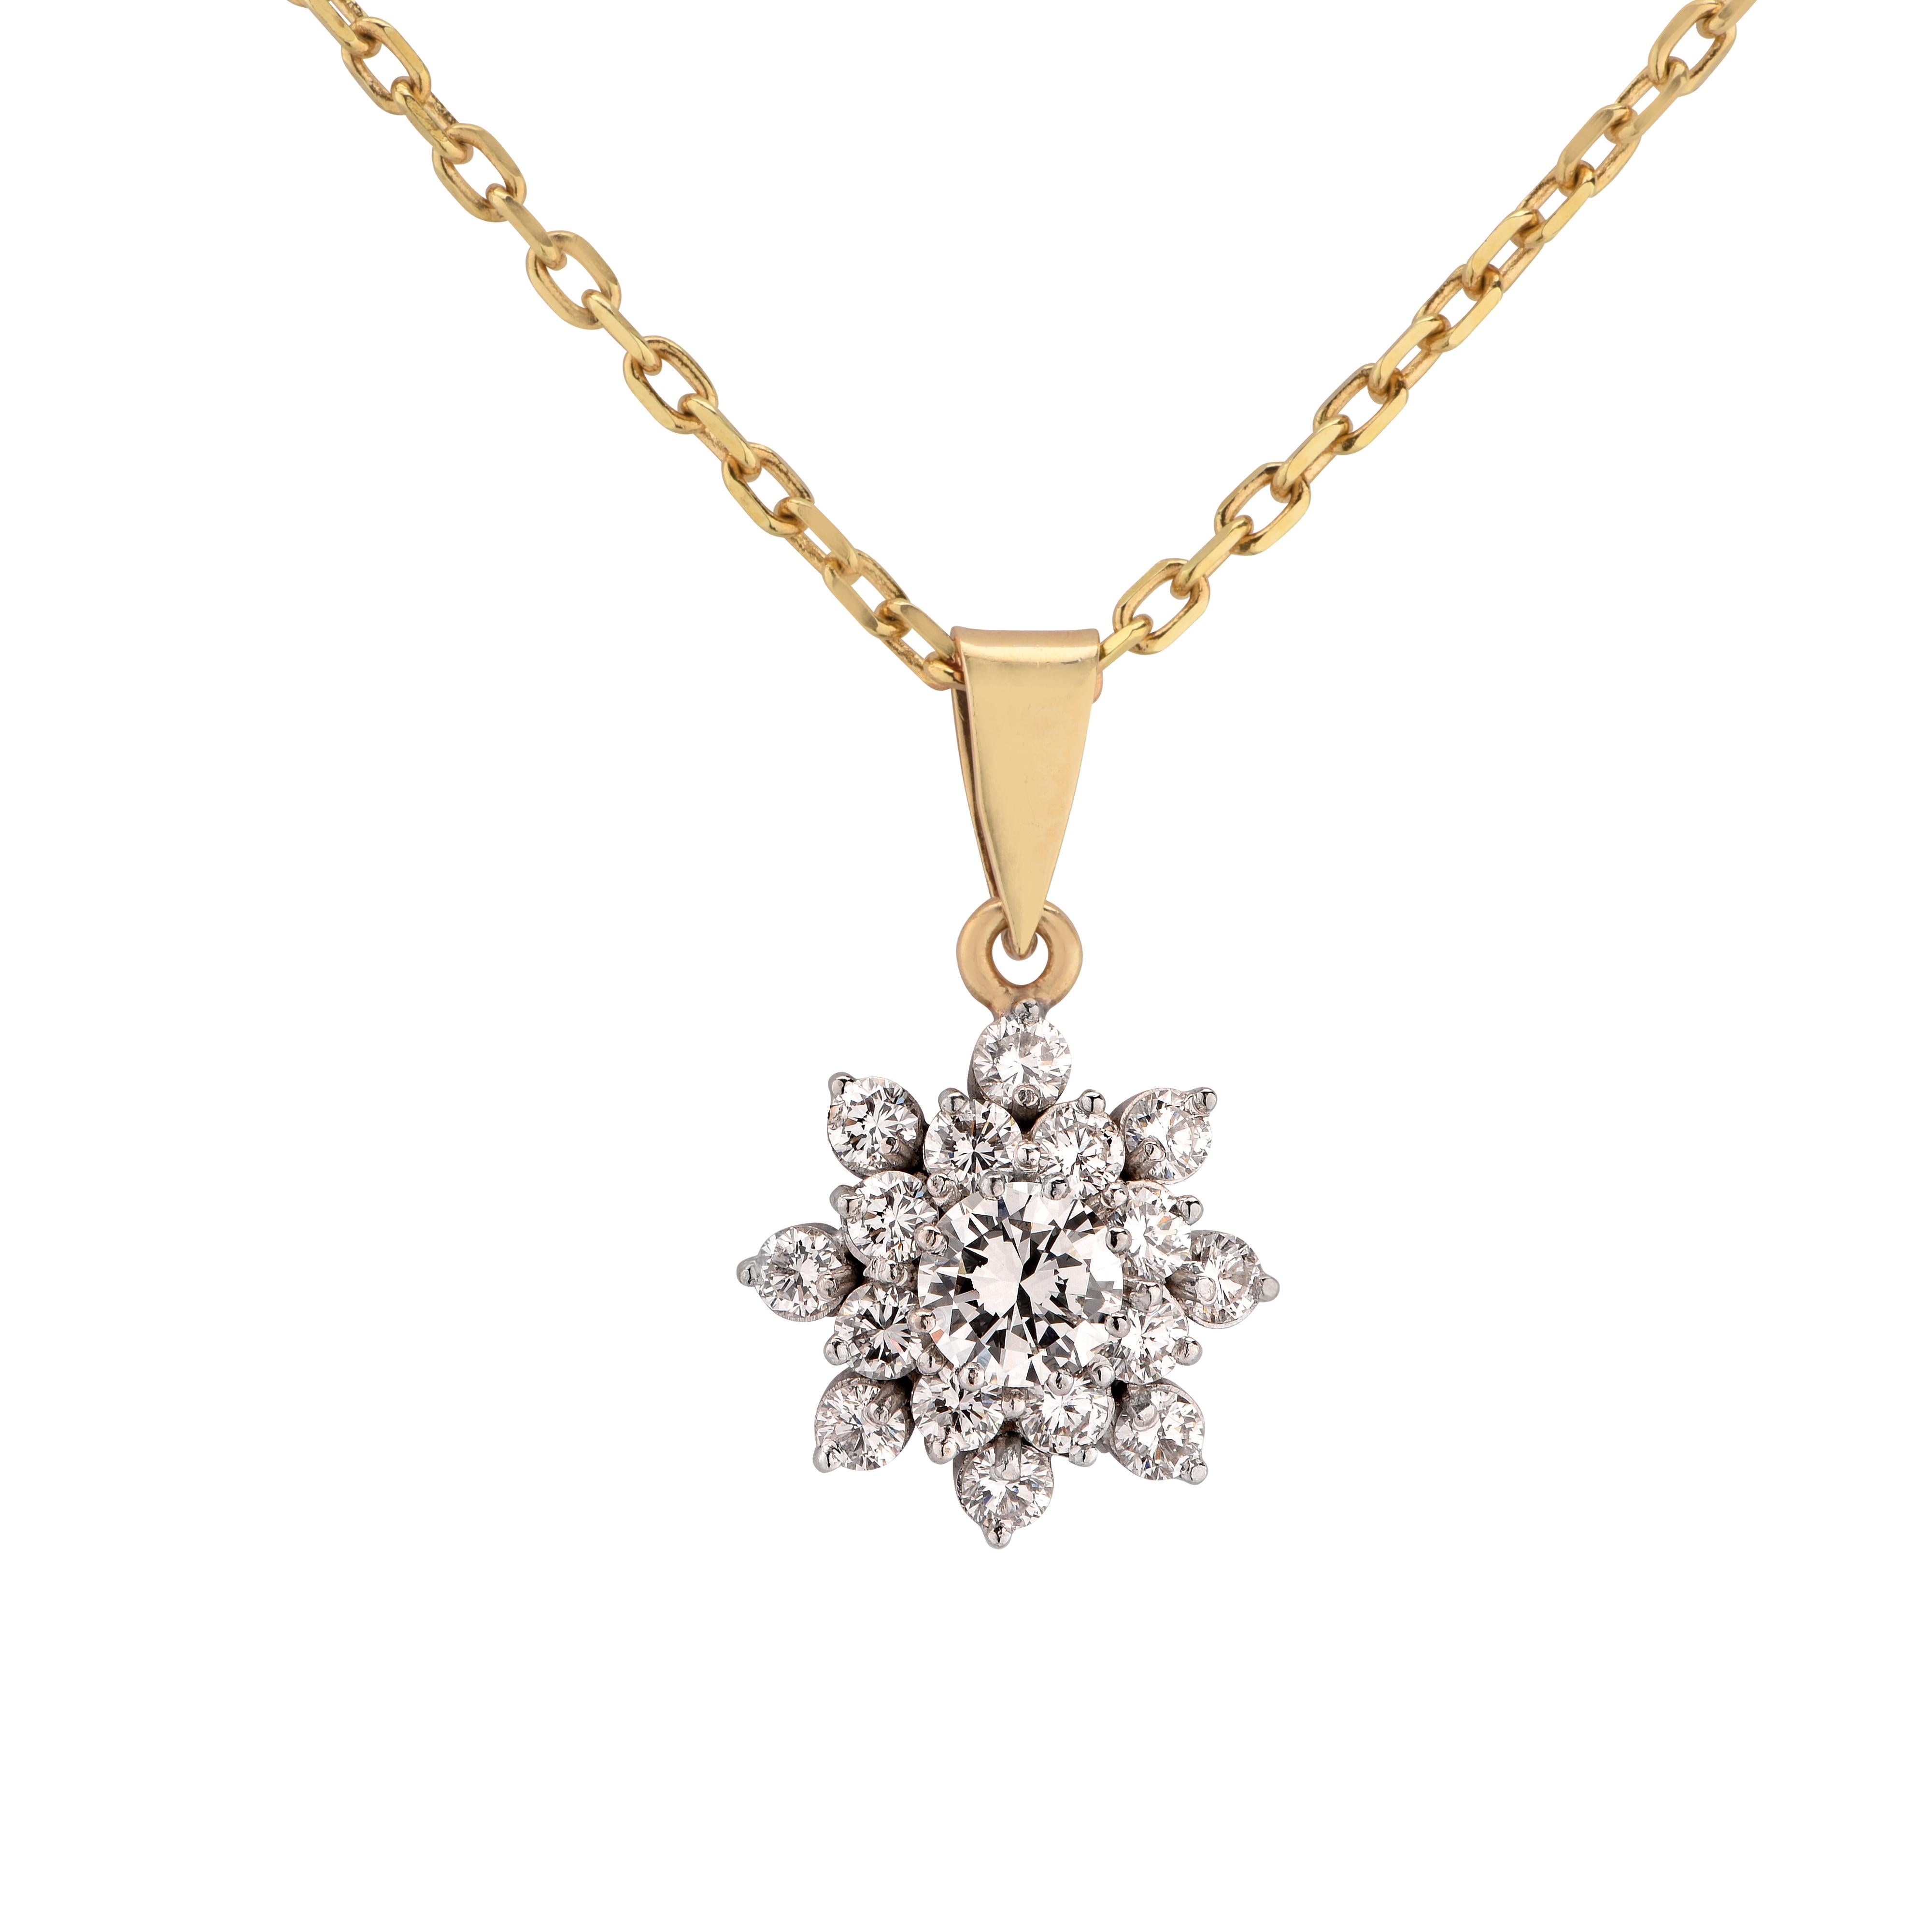 Stunning necklace and pendant crafted in 18 Karat Yellow and White gold, showcasing a .40 carat round brilliant cut diamond F color and VS clarity, accented by 16 round brilliant cut diamonds weighing approximately .60 carats, set in a snow-flake